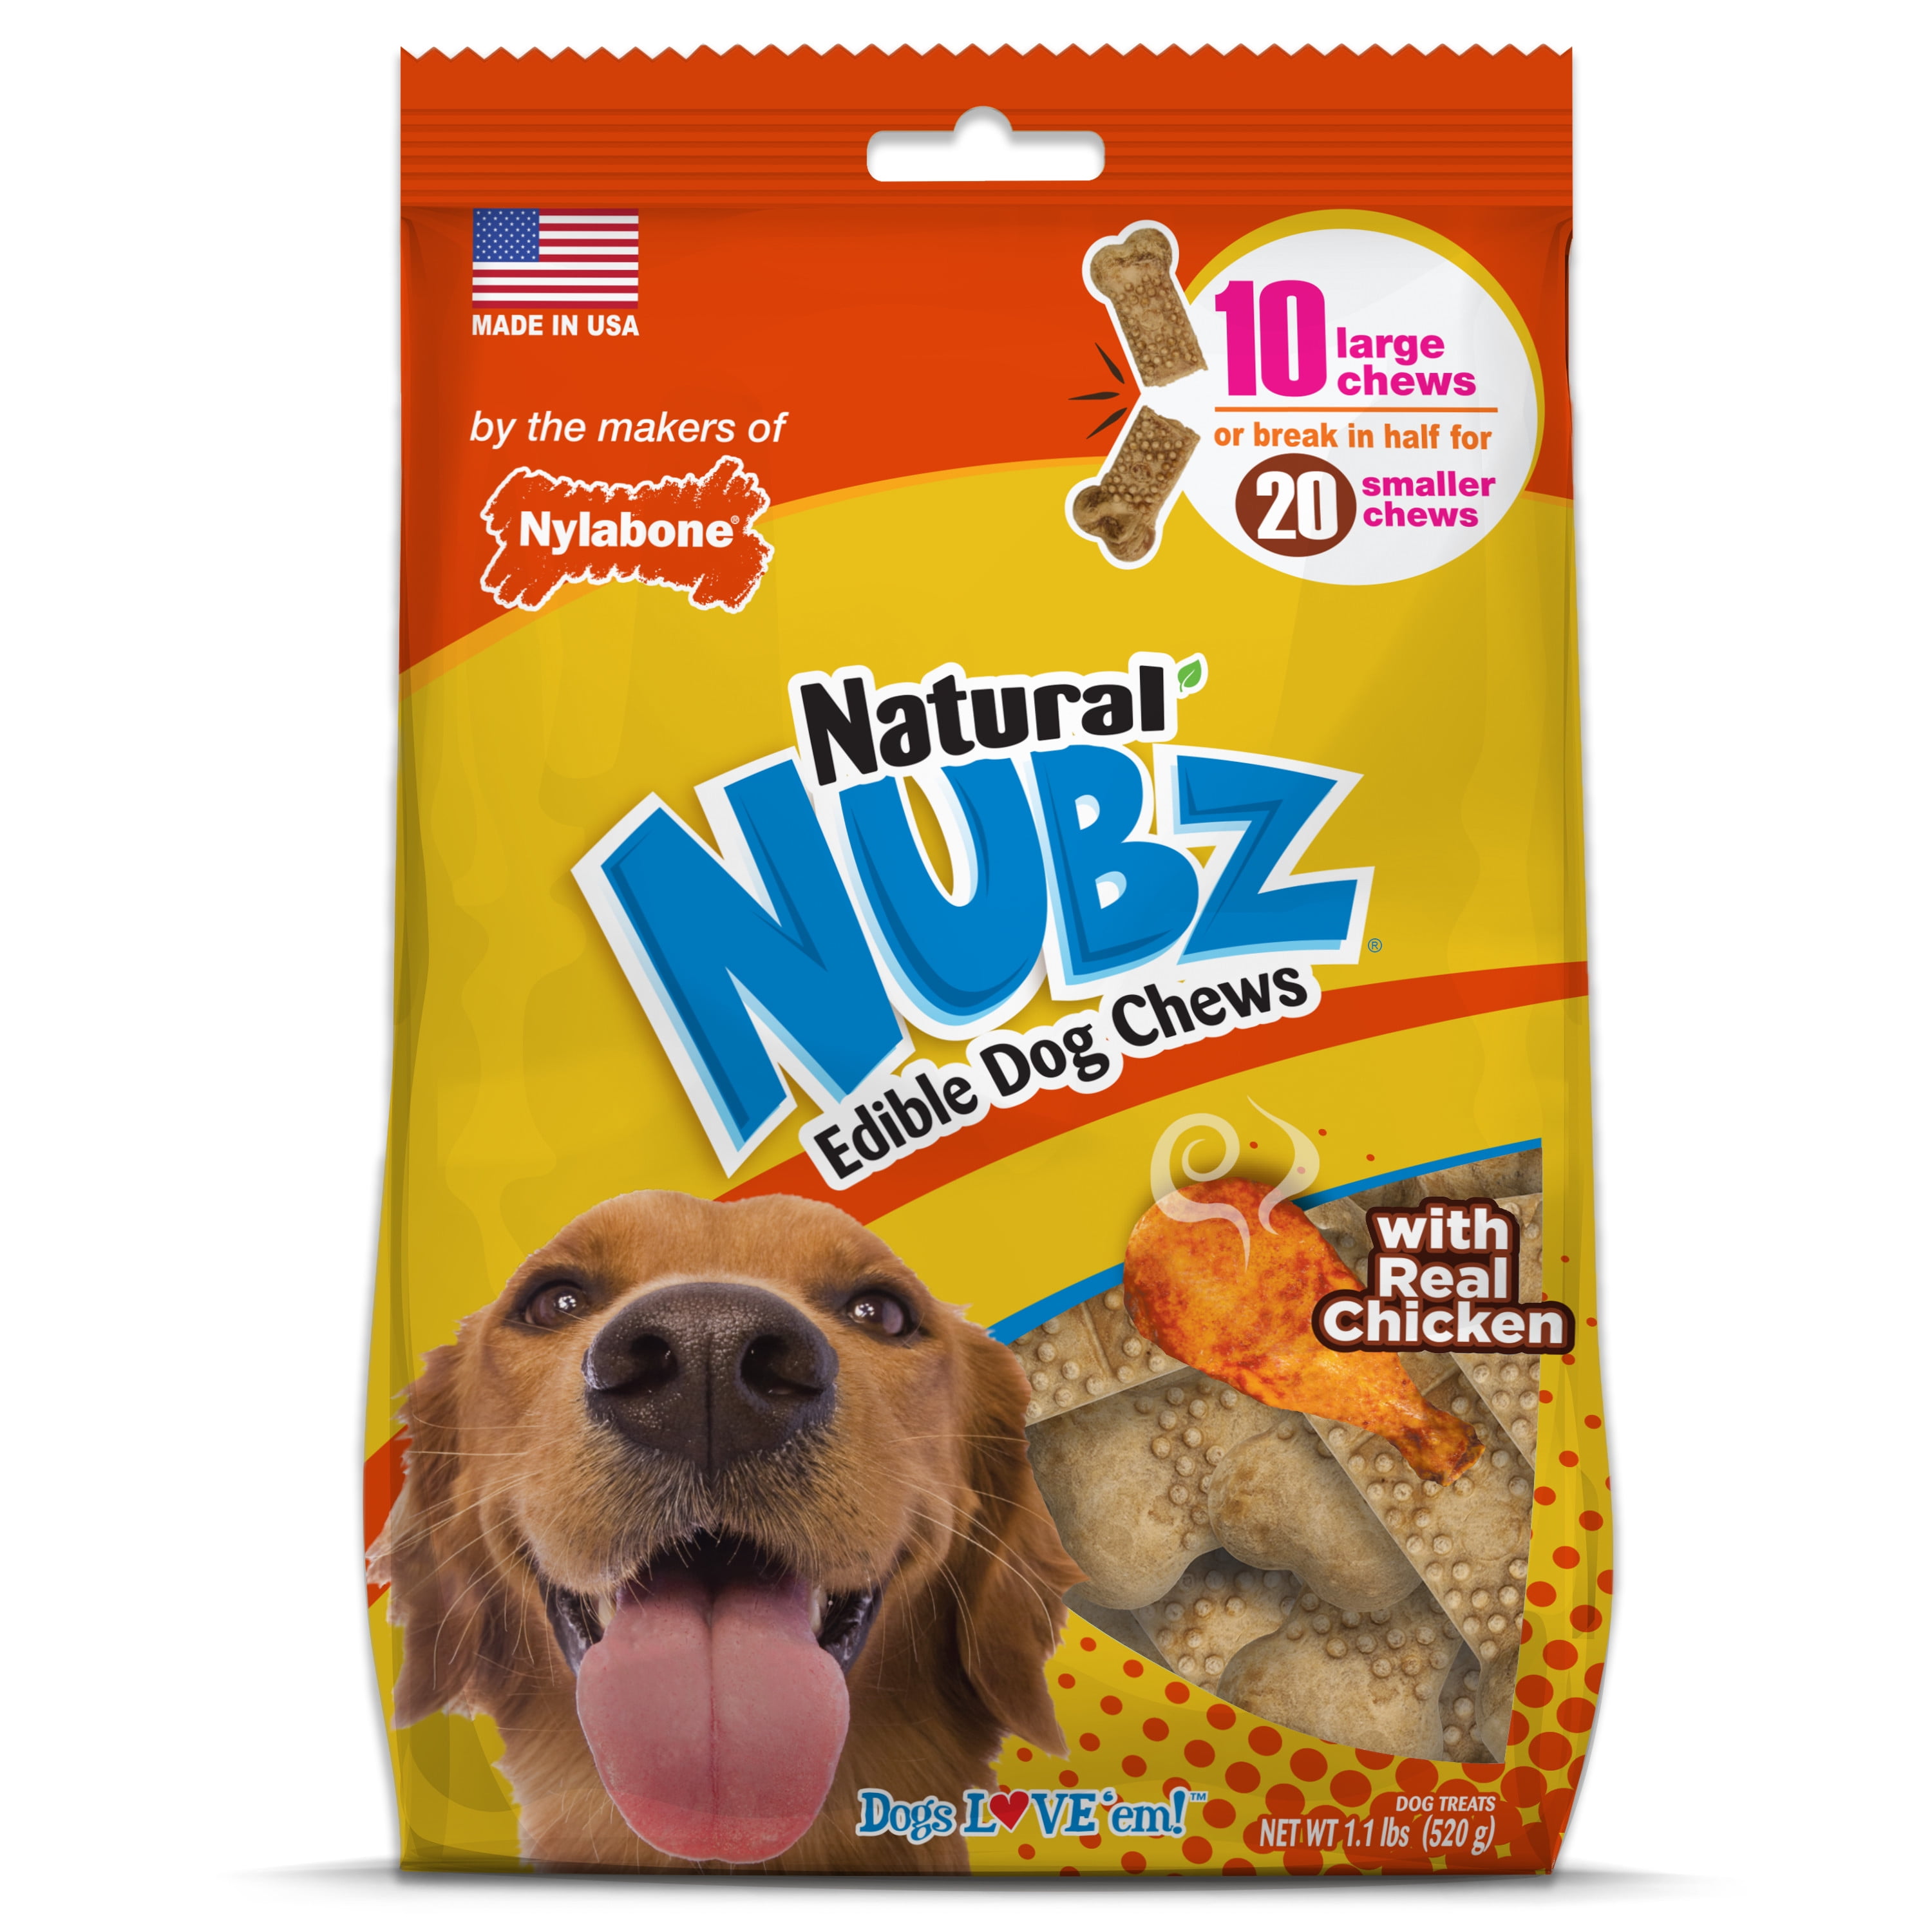 Nylabone Natural Nubz Chicken Dog Treats 10 Count Large - 30+ Ibs.